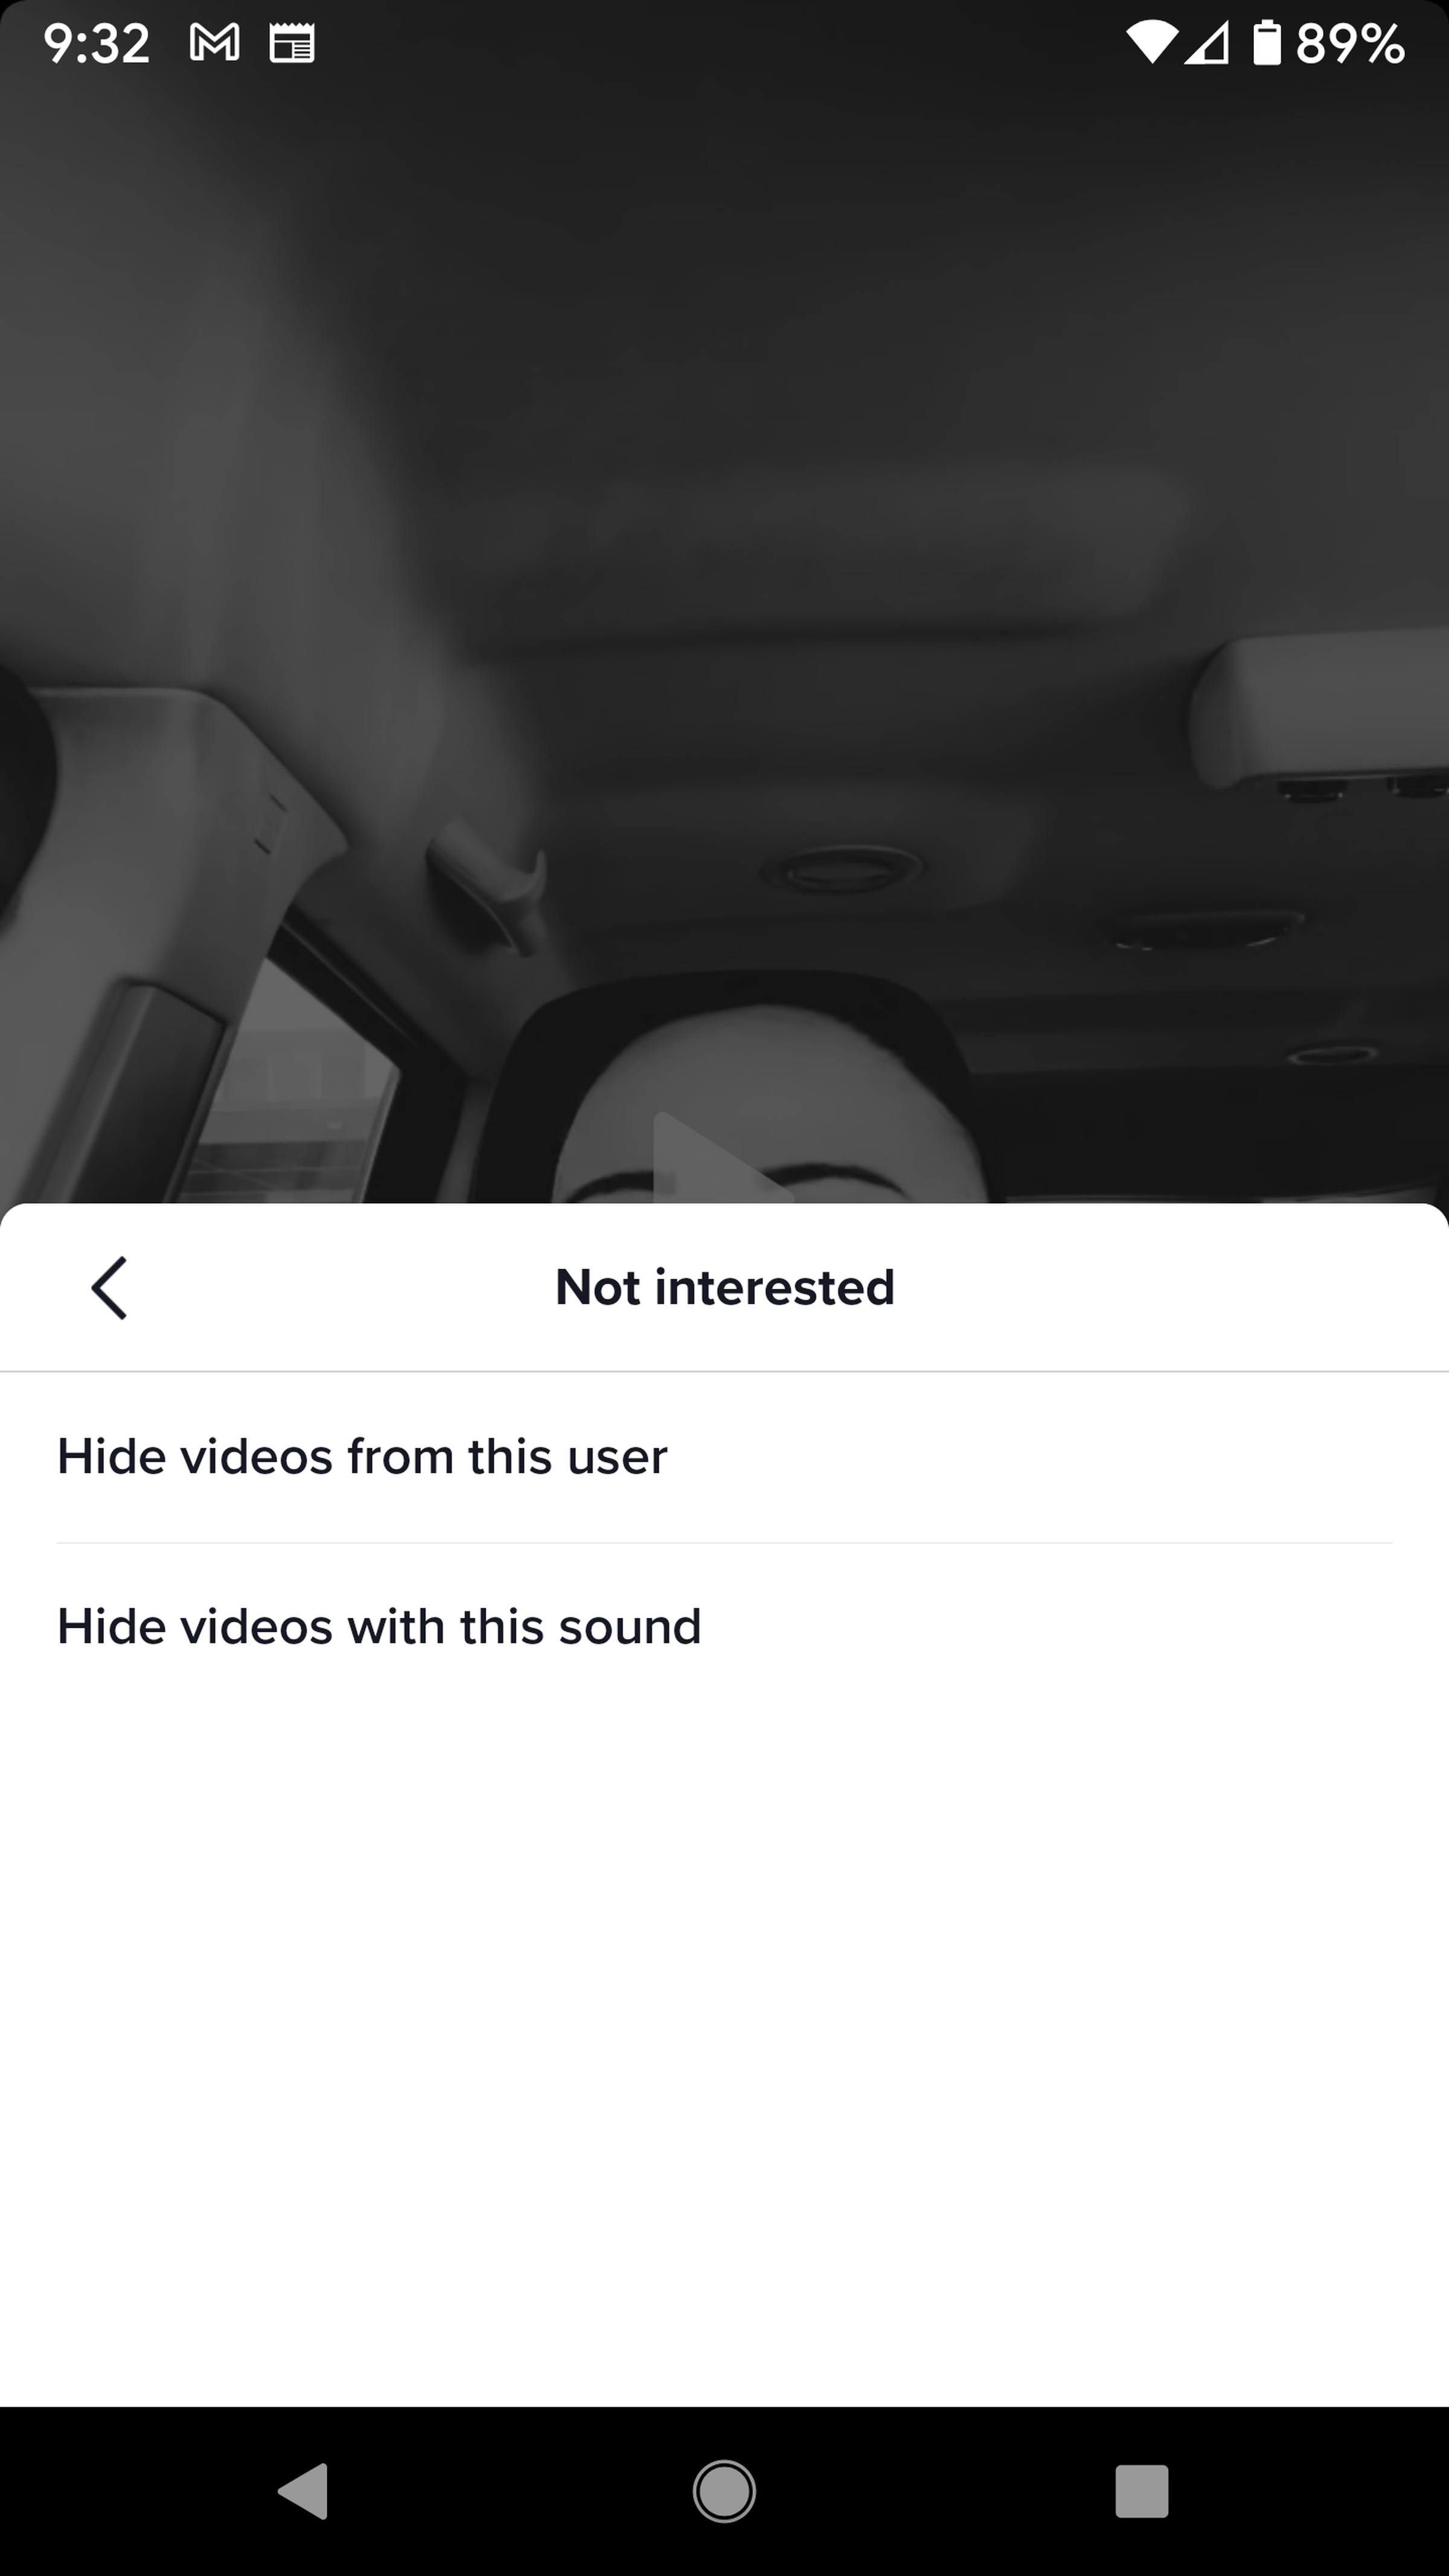 You can either hide all videos from the creator, or hide all videos that use that sound clip.